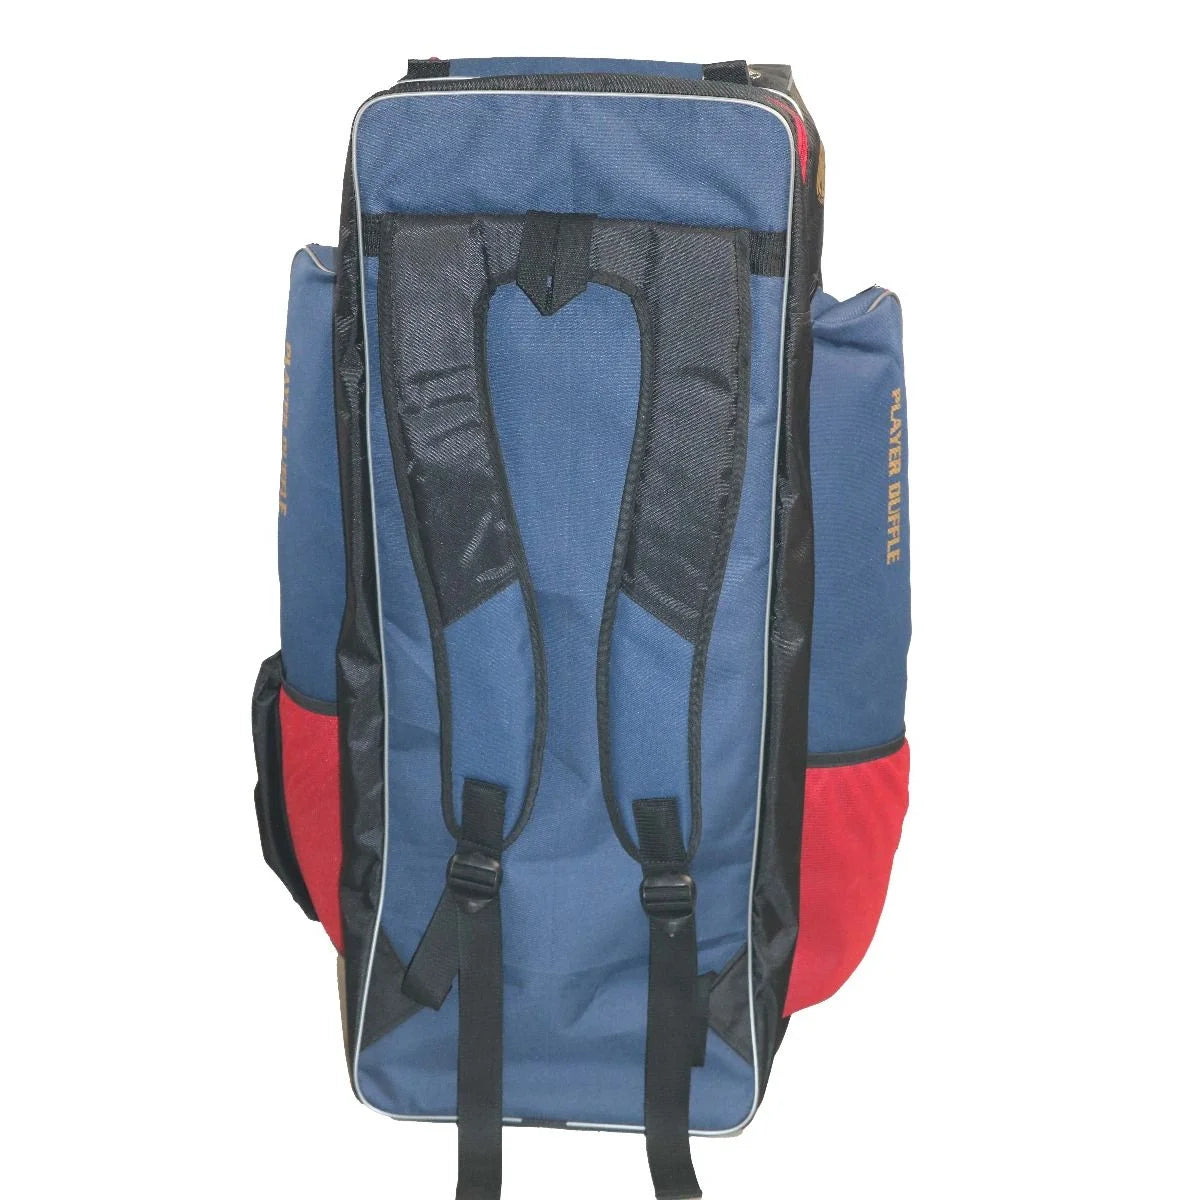 Buy Cricket Kit Bags Online at Best Price India - GM Cricket